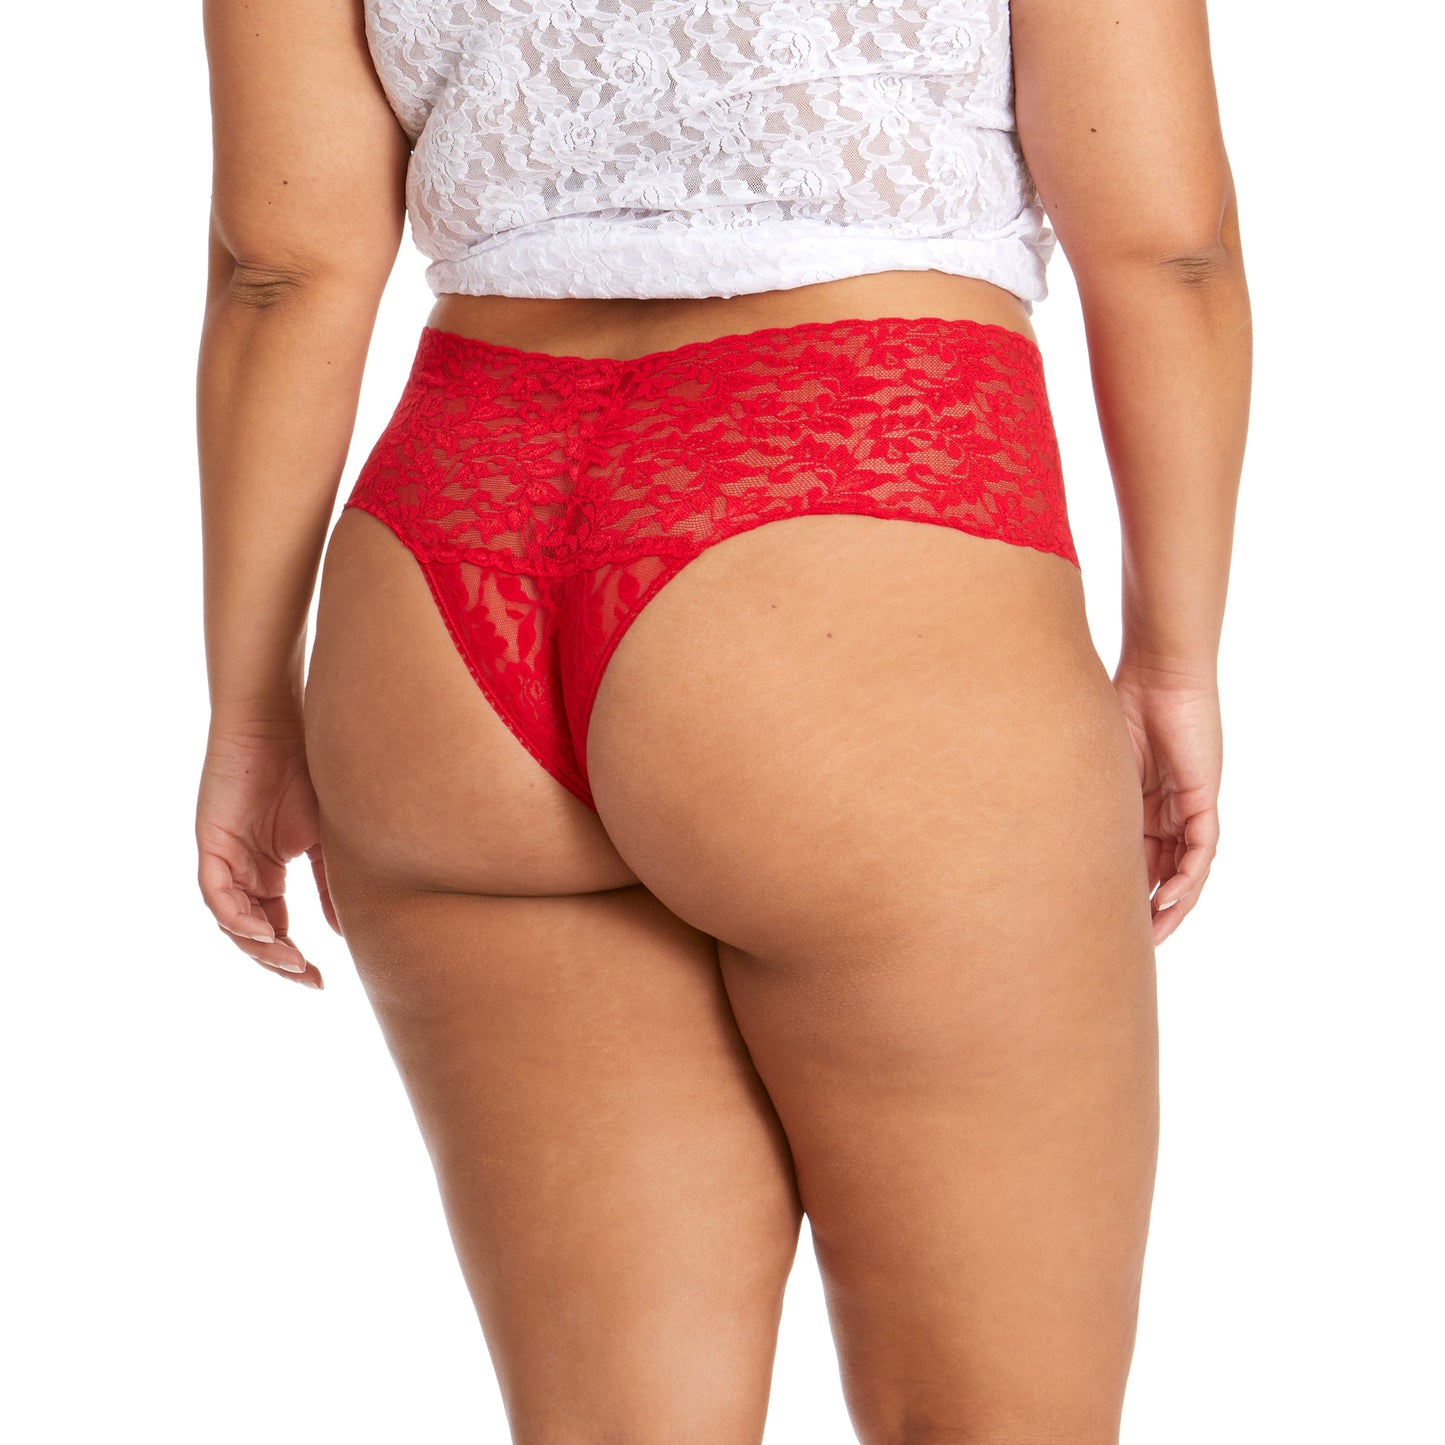 Hanky Panky Plus Retro Thong Red worn by model back view